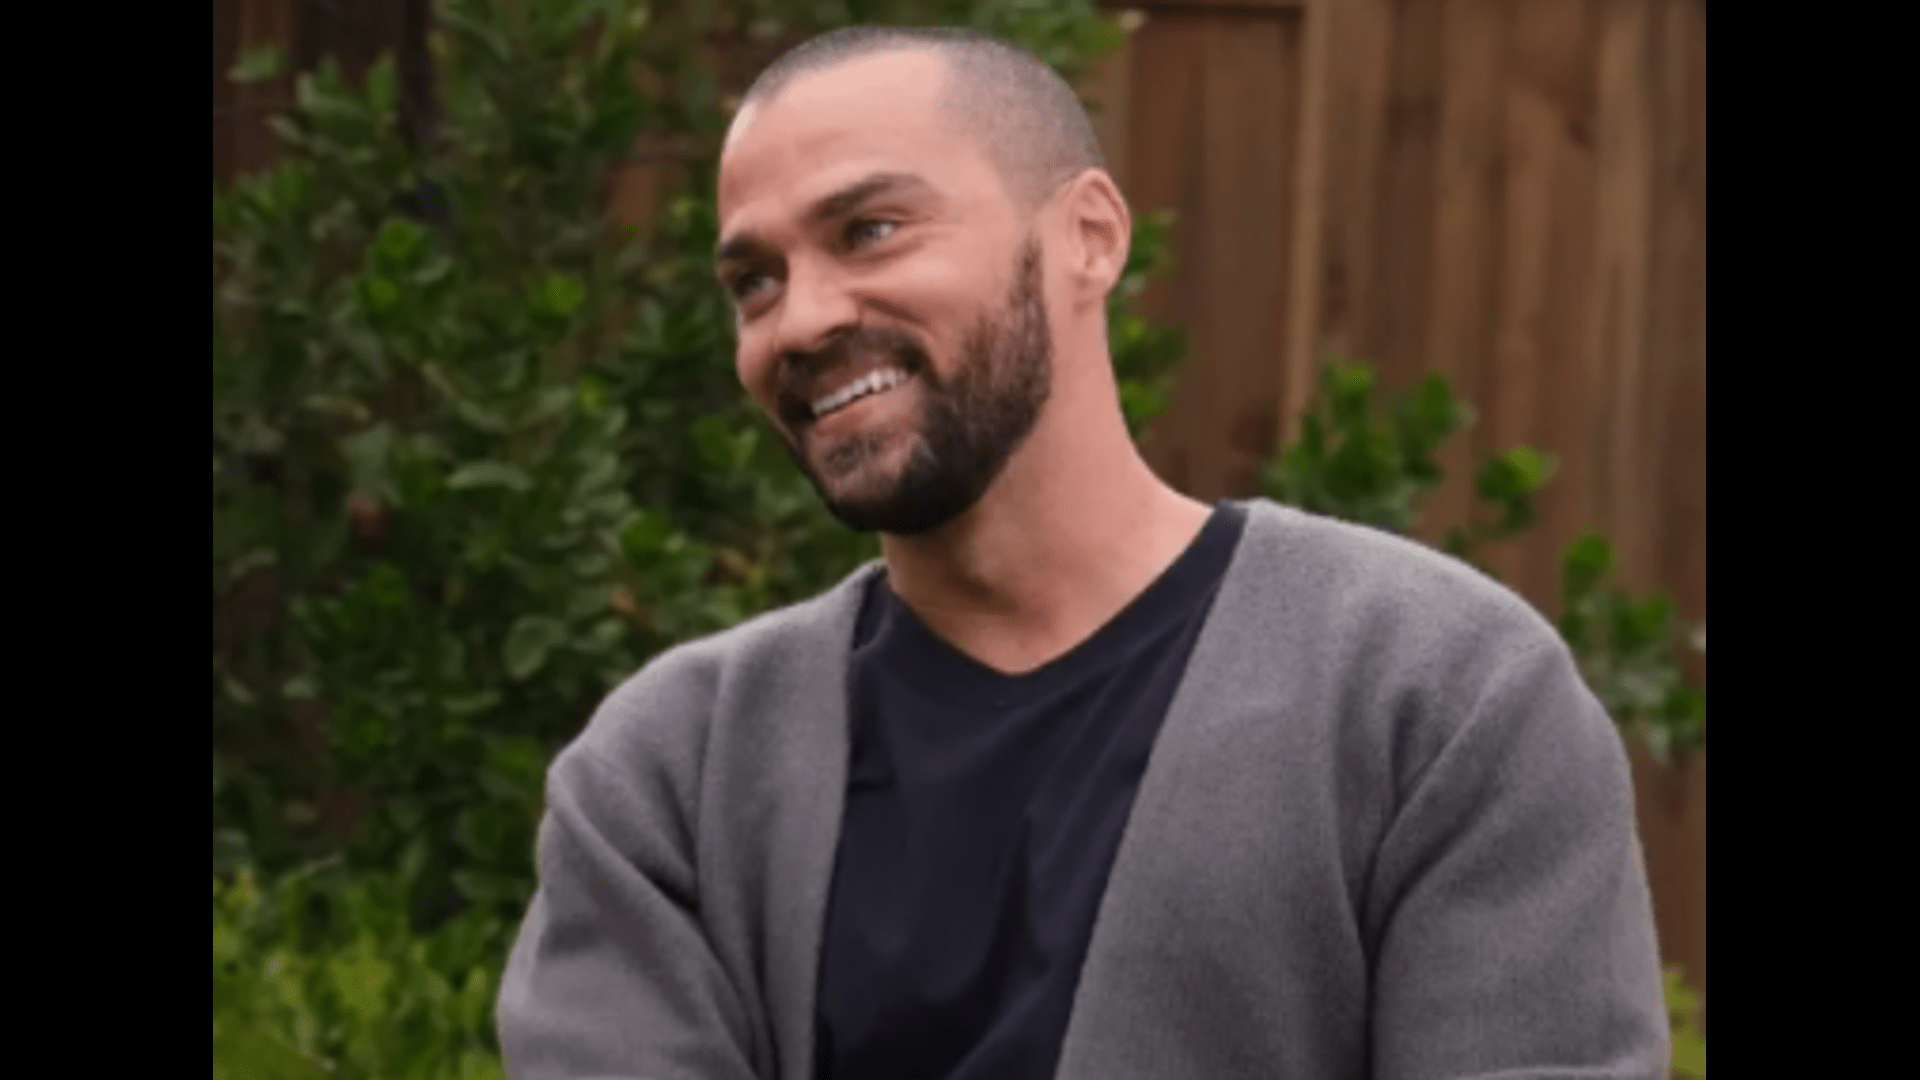 ”in-the-new-broadway-show-greys-anatomy-star-jesse-williams-is-scared-of-being-naked”